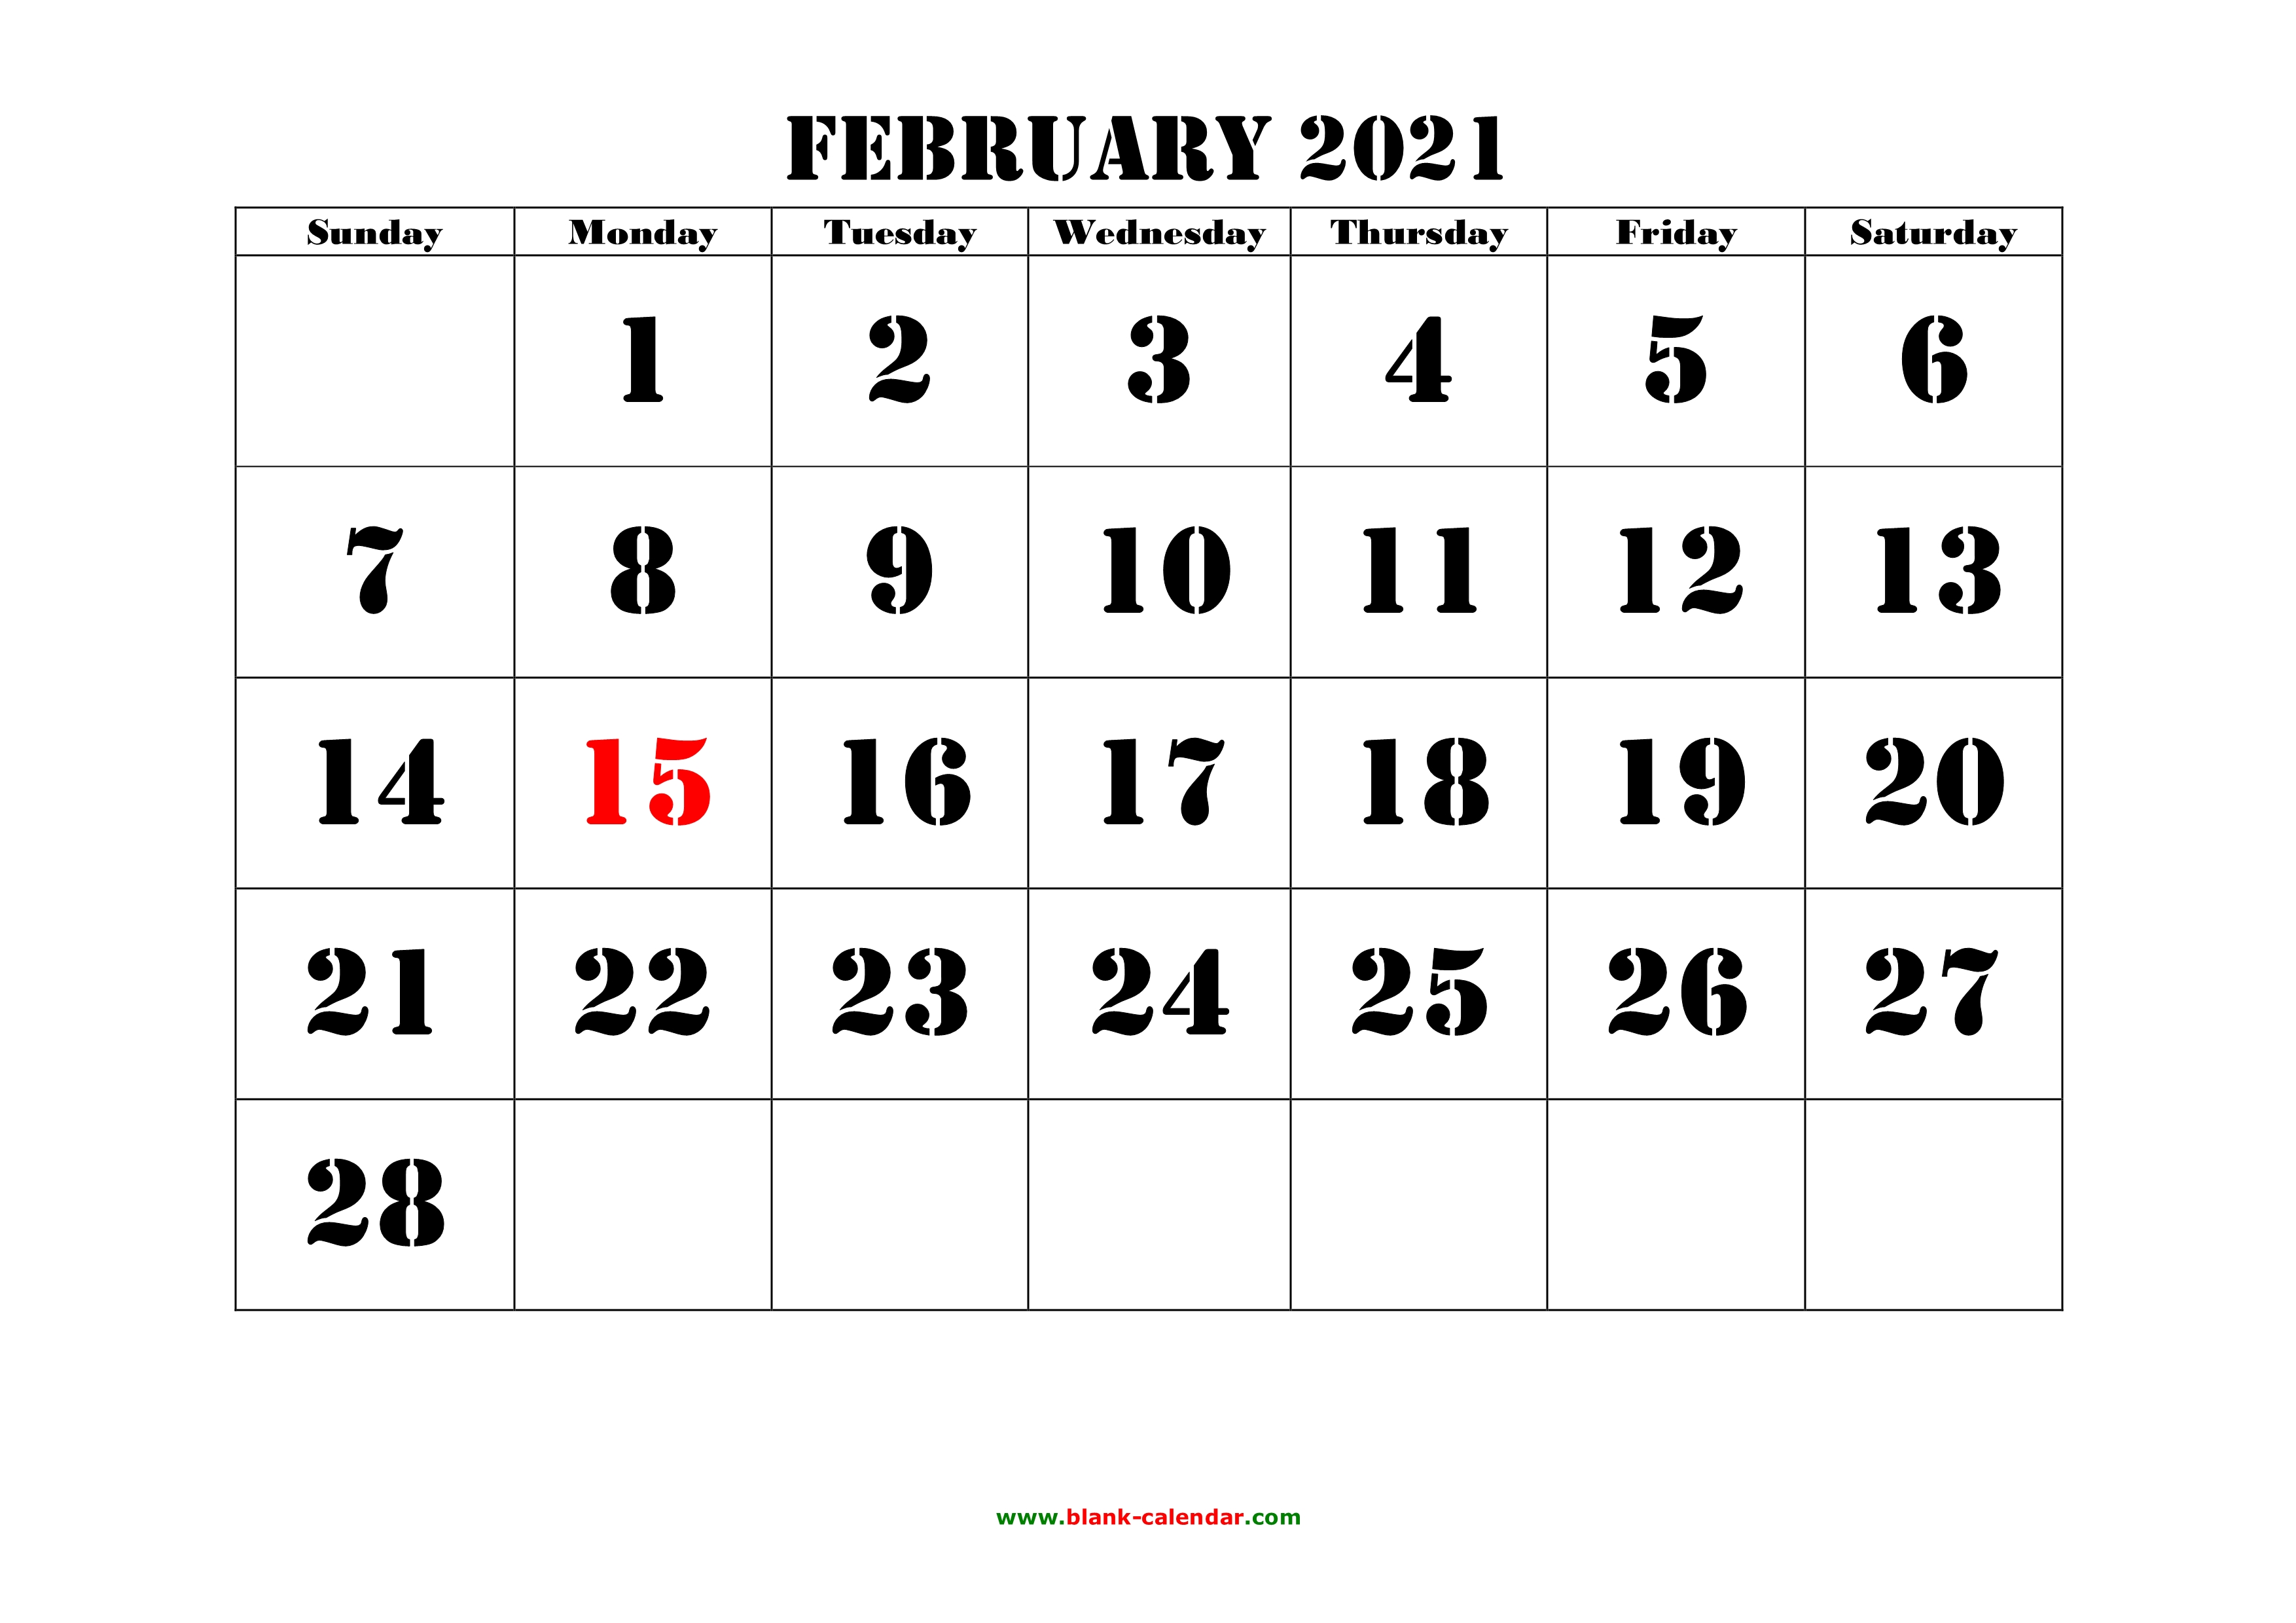 February 2021 Printable Calendar Free Download Monthly Calendar Templates By simply clicking on it, you can see it, start to customize it, and print it. february 2021 printable calendar free